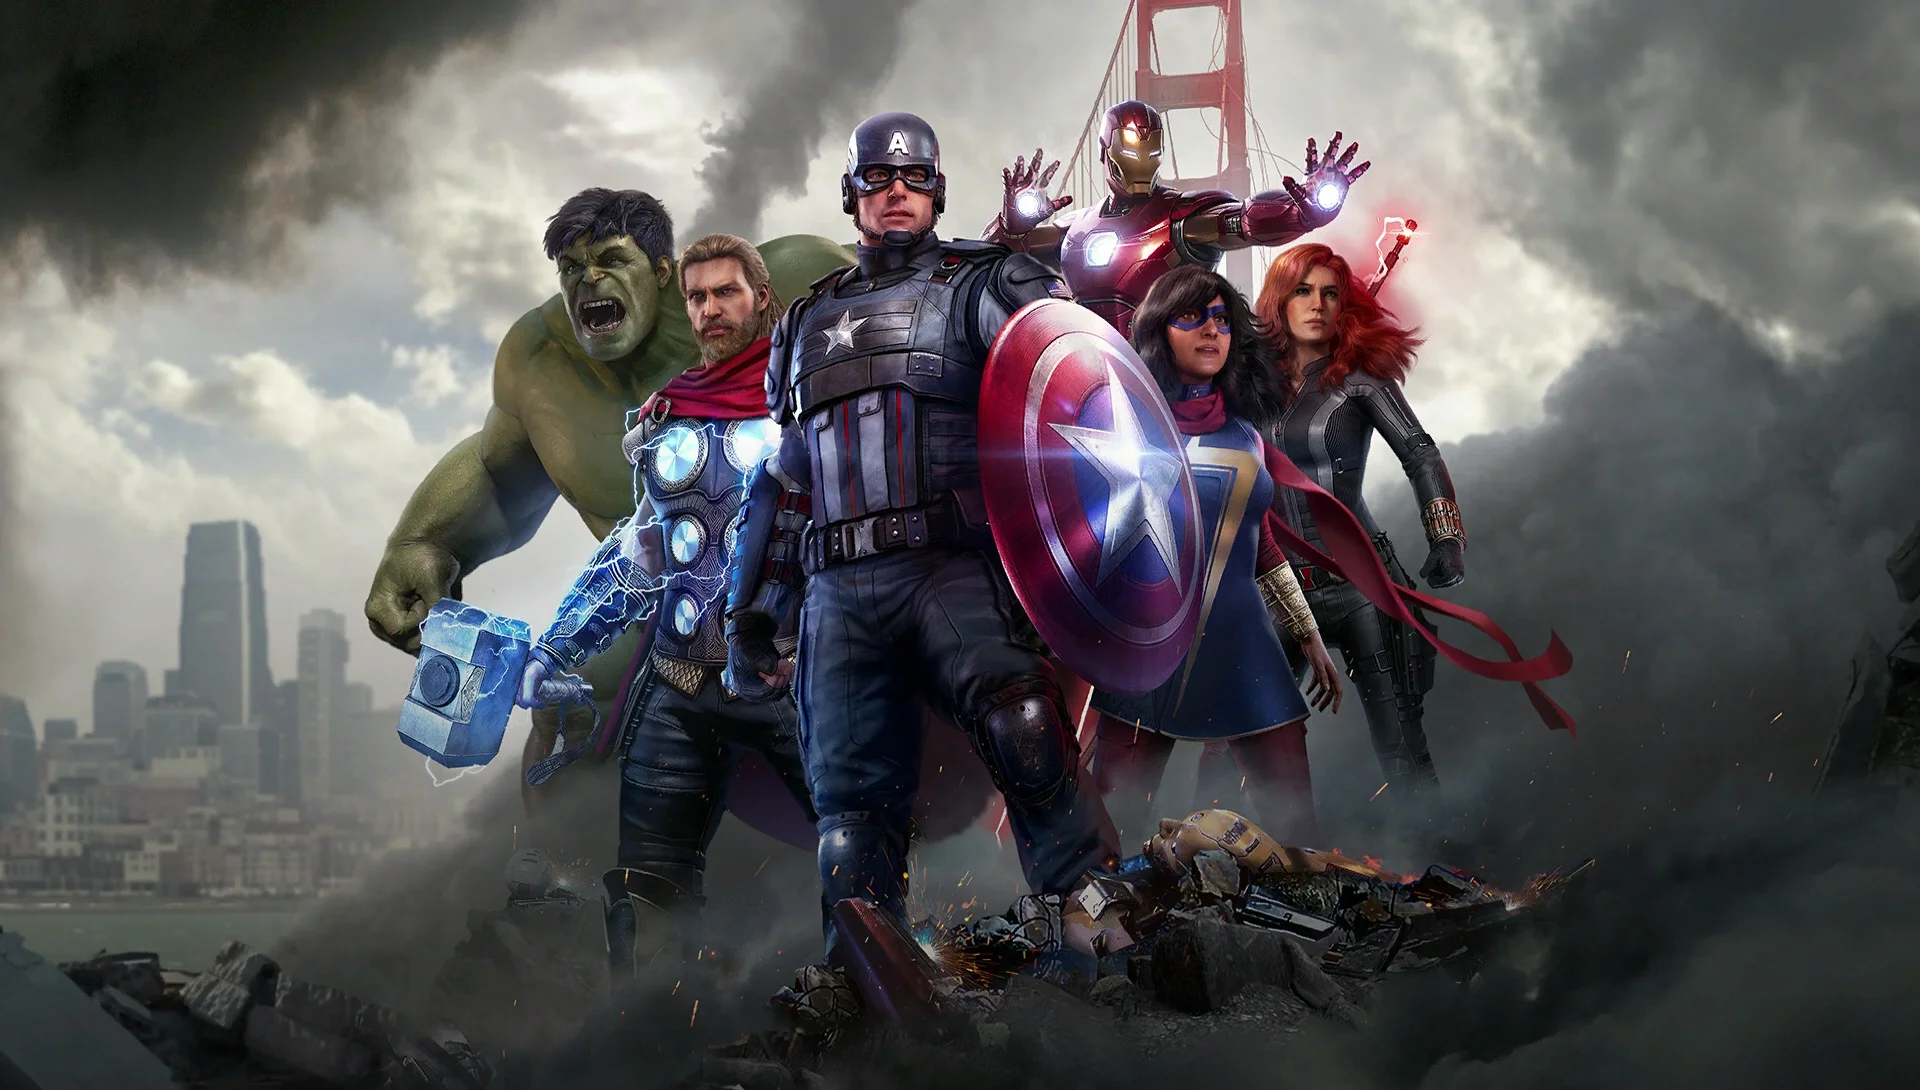 Marvel's Avengers has become unavailable on all digital platforms